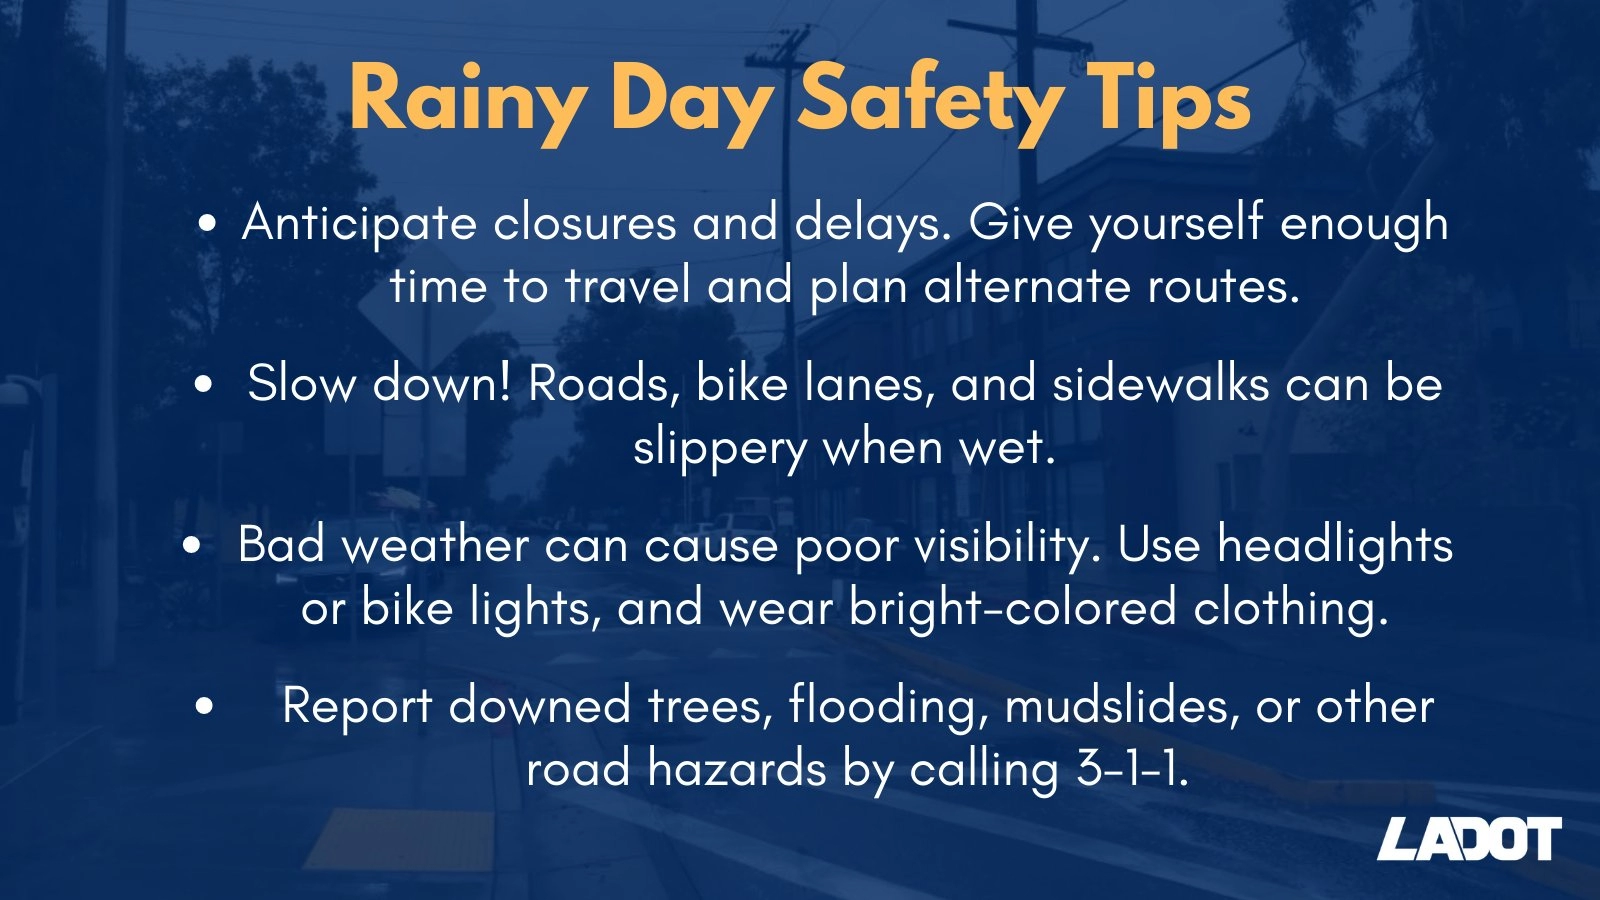 Rainy Day Safety Tips: Anticipate closures and delays. Give yourself enough time to travel and plan alternate routes. -Slow down! Roads, bike lanes, and sidewalks can be slippery when wet. -Bad weather can cause poor visibility. Use headlights or bike lights, and wear bright-colored clothing. -Report downed trees, flooding, mudslides, or other road hazards by calling 3-1-1.